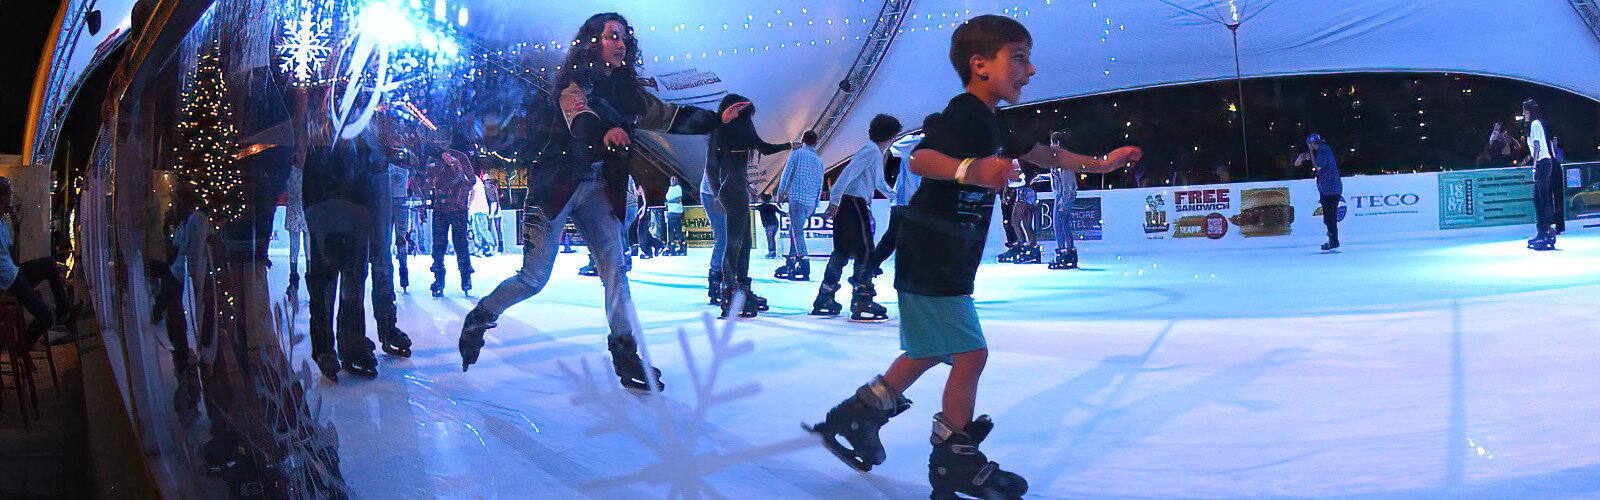 At Curtis Hixon Waterfront Park in Tampa, Winter Village's ice skating rink is a popular attraction this December.